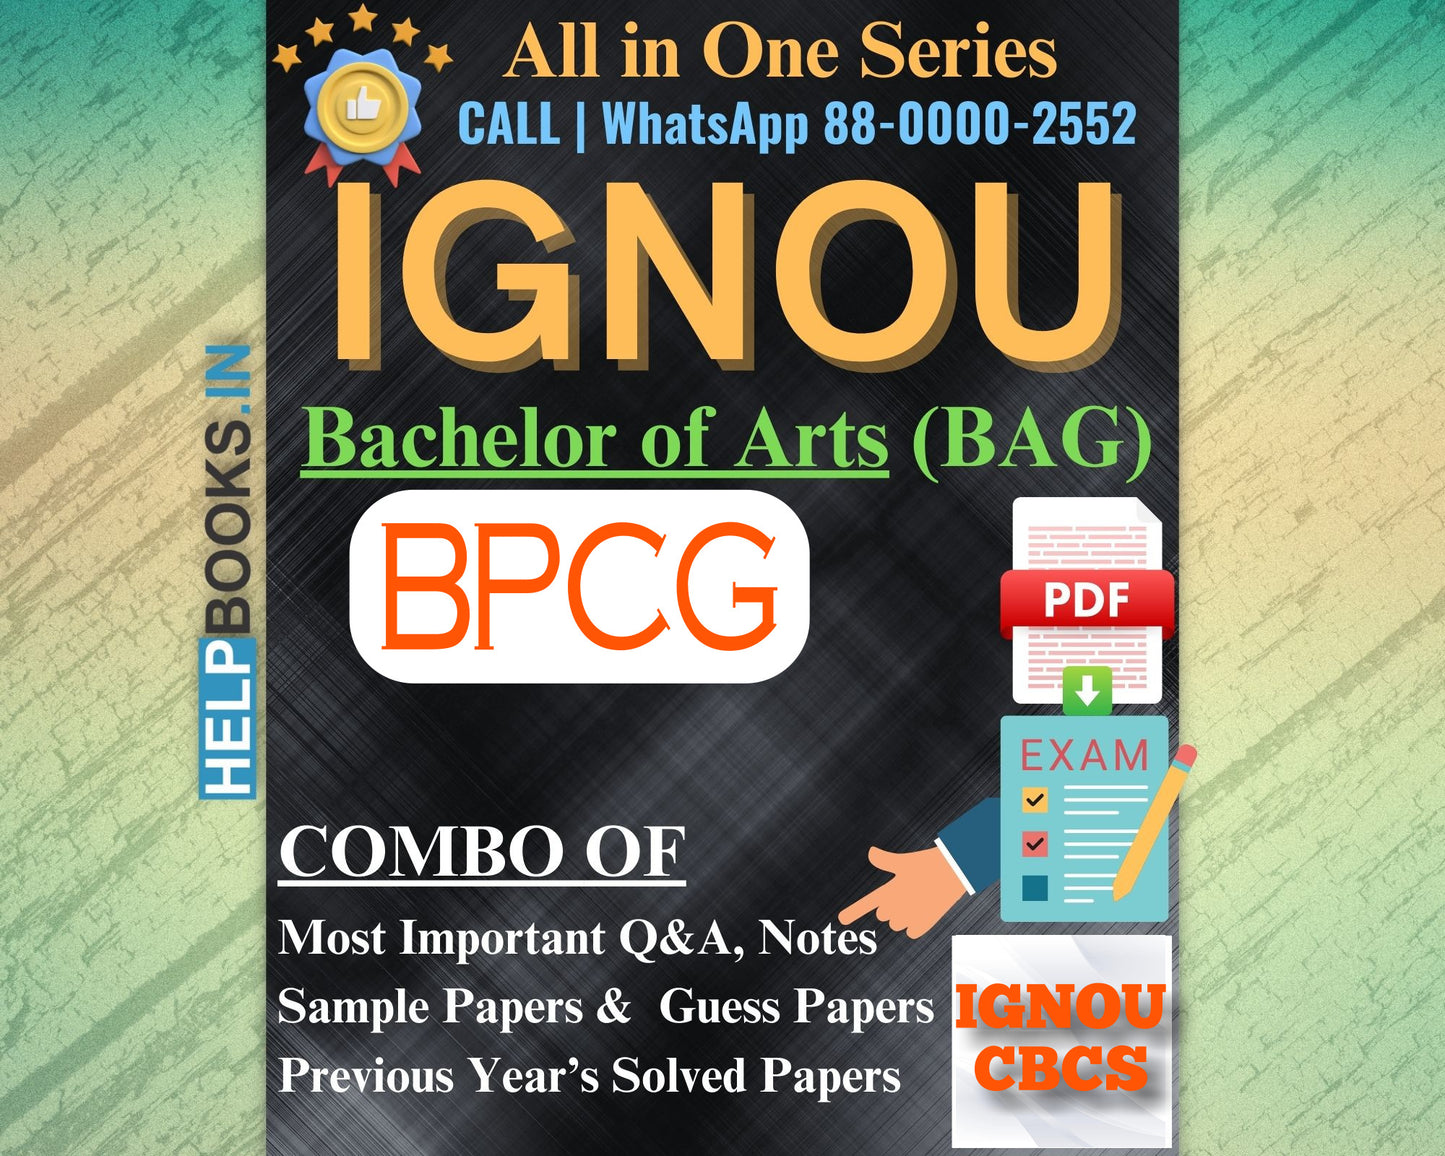 IGNOU BAG Online Study Package: Bachelor of Arts (BA) - Previous Year’s Solved Papers, Q&A, Exam Notes, Sample Papers, Guess Papers-BPCG171, BPCG172, BPCG173, BPCG174, BPCG175, BPCG176